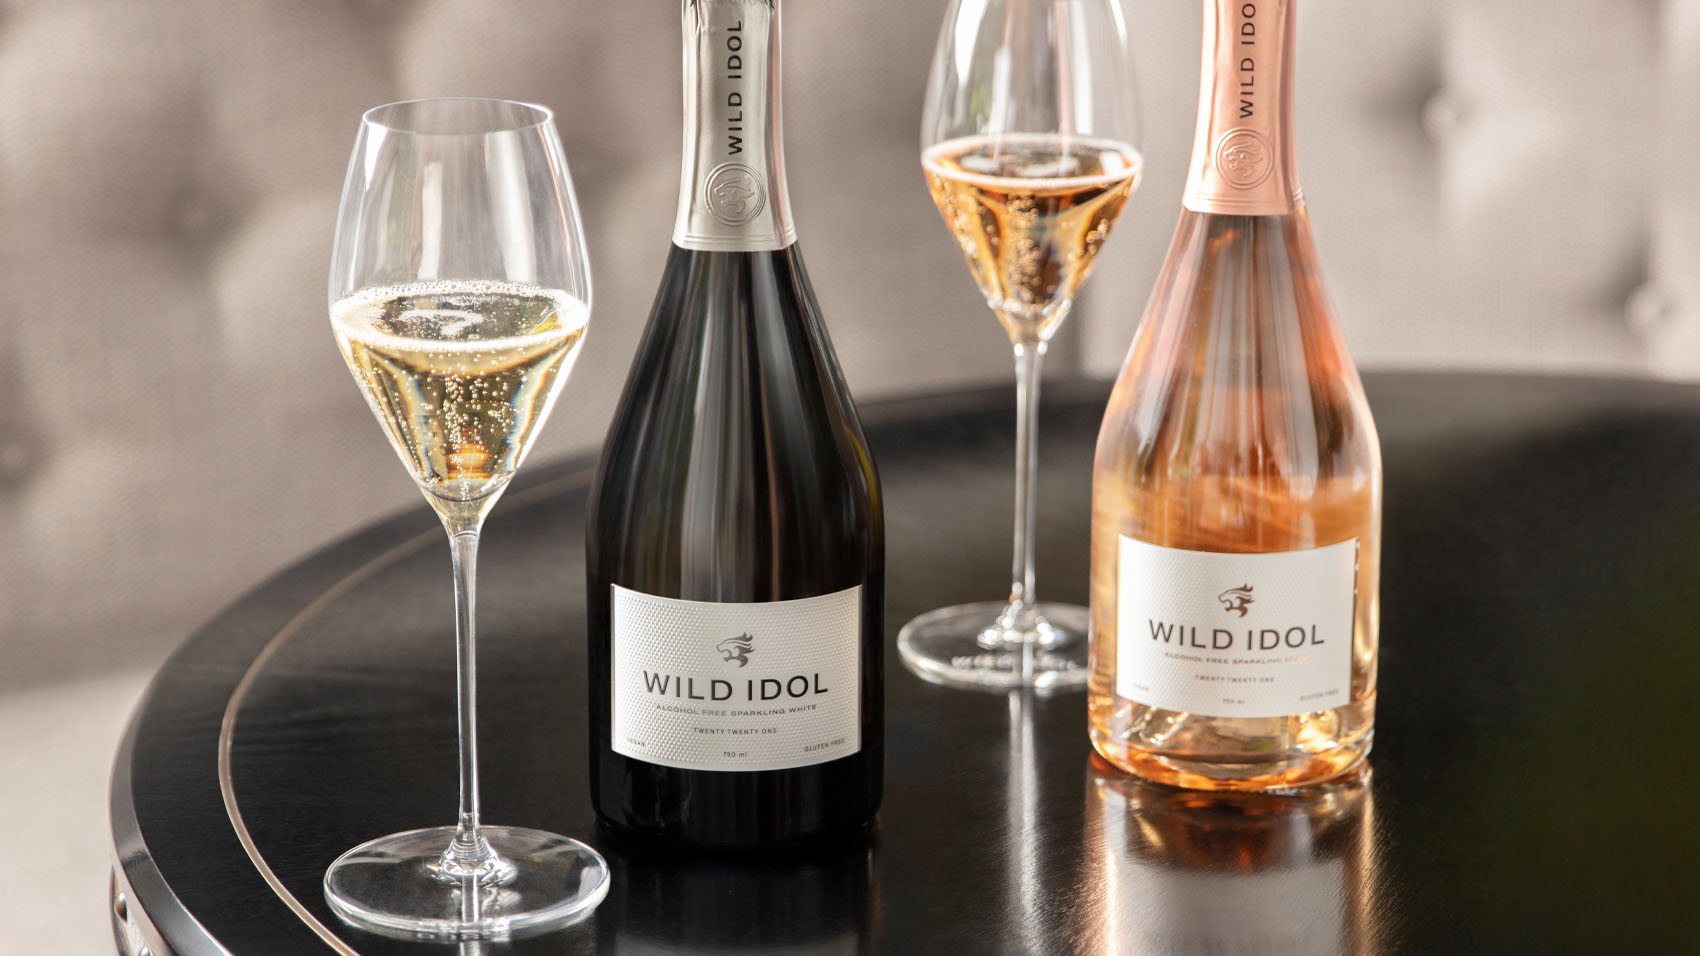 Glasses of WILD IDOL Alcohol Free Sparkling Rosé & White Wine, standing on a table, alongside their bottles